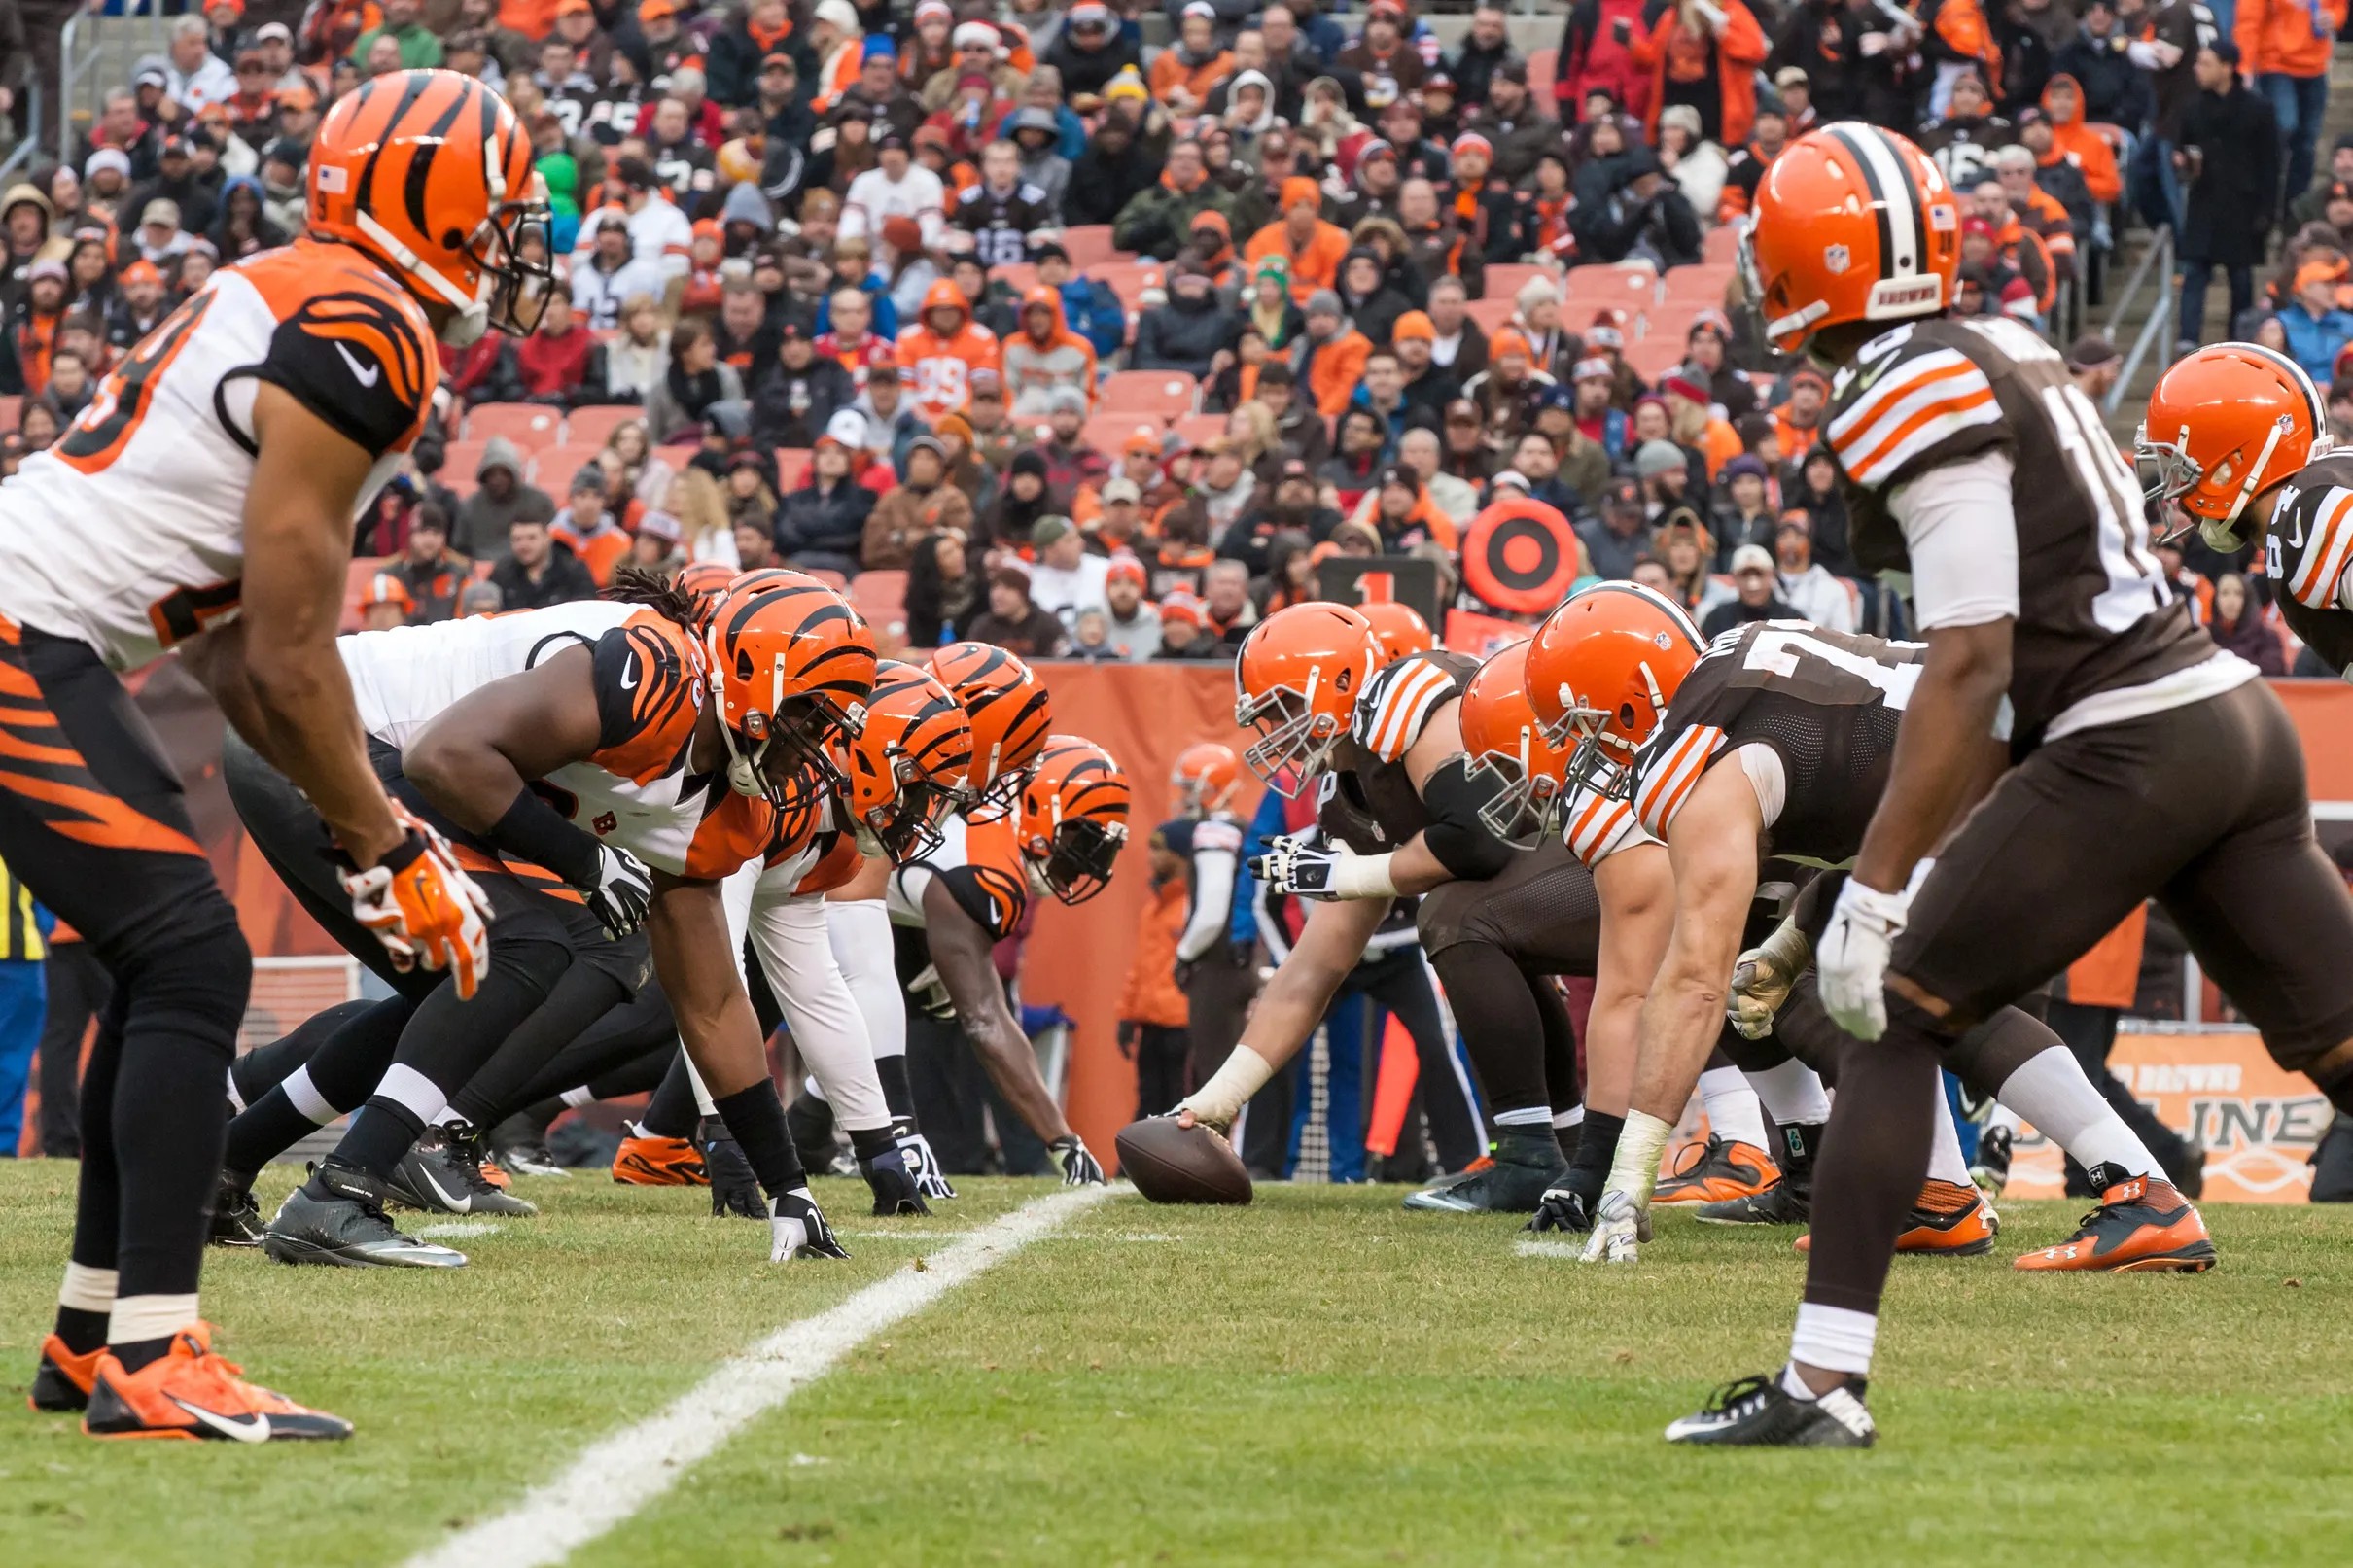 Cincinnati Bengals vs. Cleveland Browns: Everything to know for